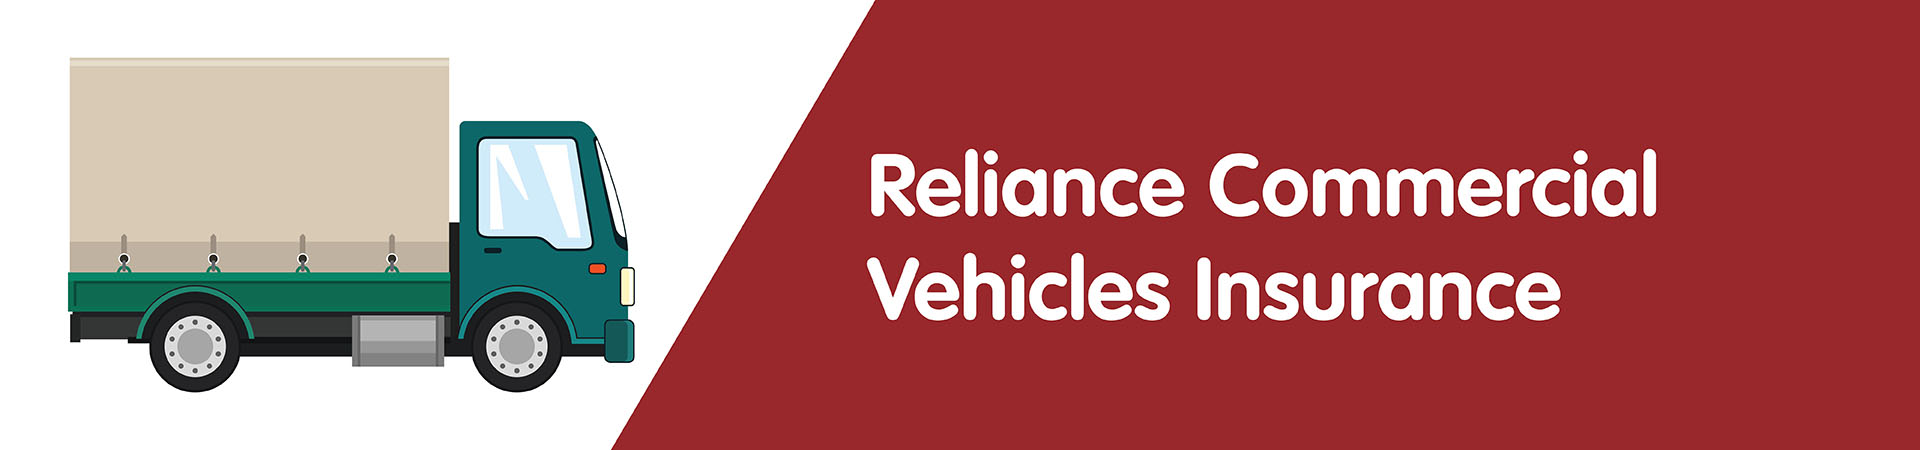 NRI - reliance commercial vehicle package policy